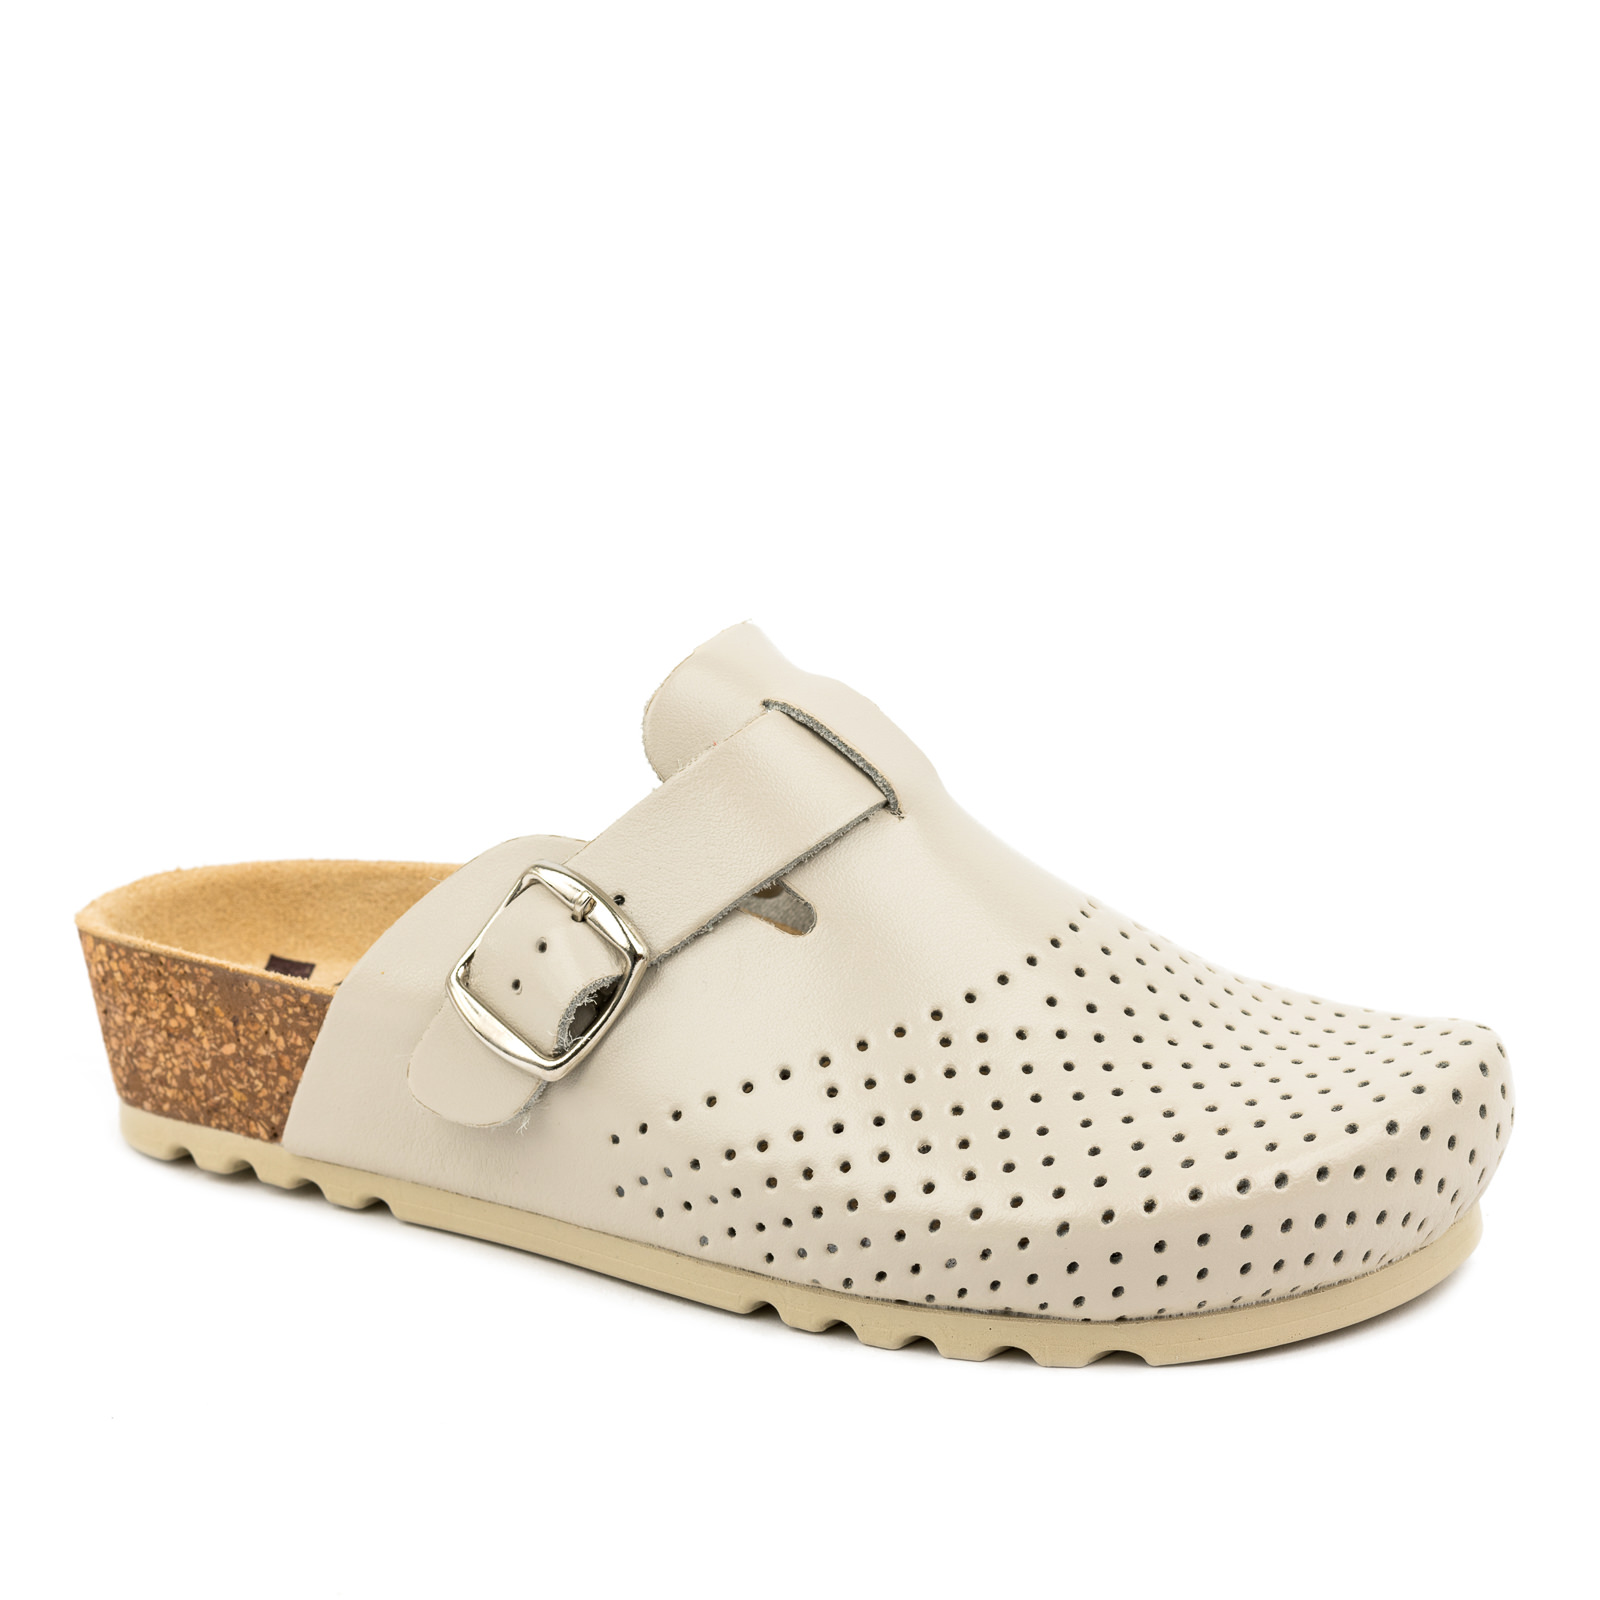 LEATHER ANATOMIC CLOGS WITH VELCRO BAND - BEIGE